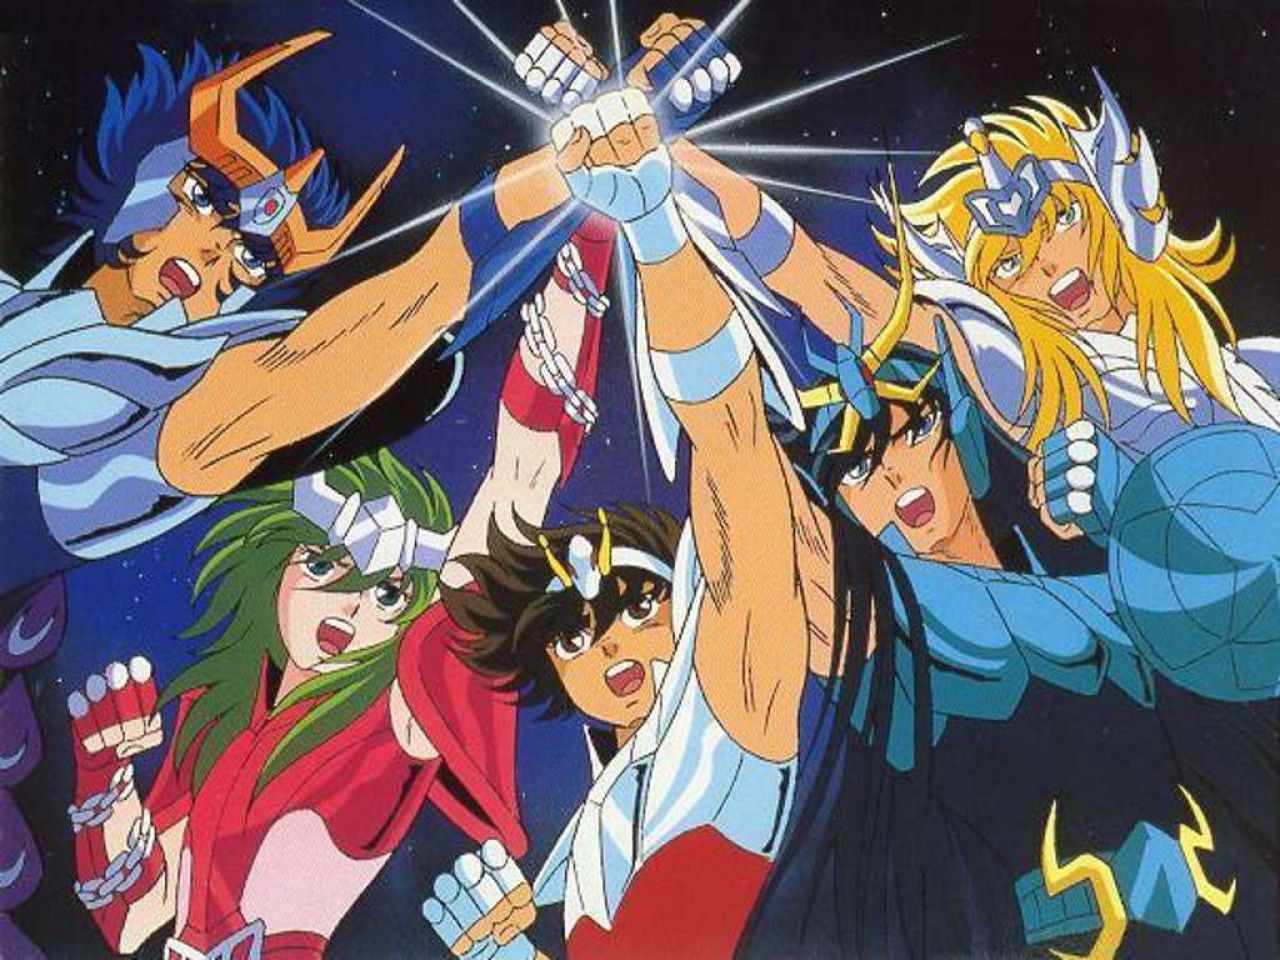 Anime Breakfast: Knights of the Zodiac and the poetic struggle